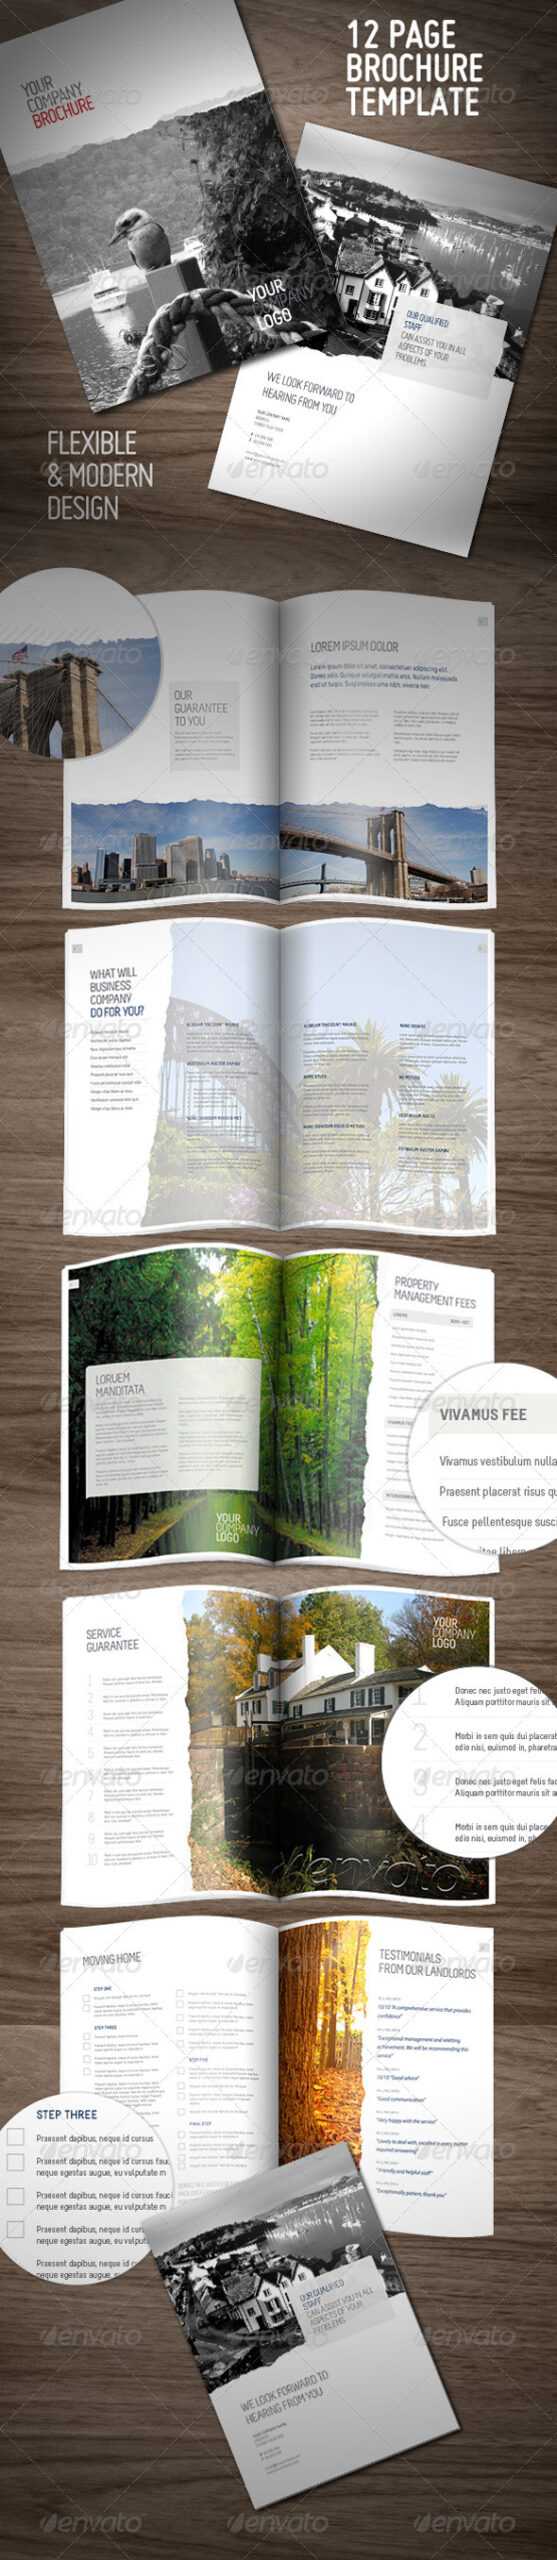 100+ Brochure Template Pages | 1634 Best Brochure Design Pertaining To 12 Page Brochure Template